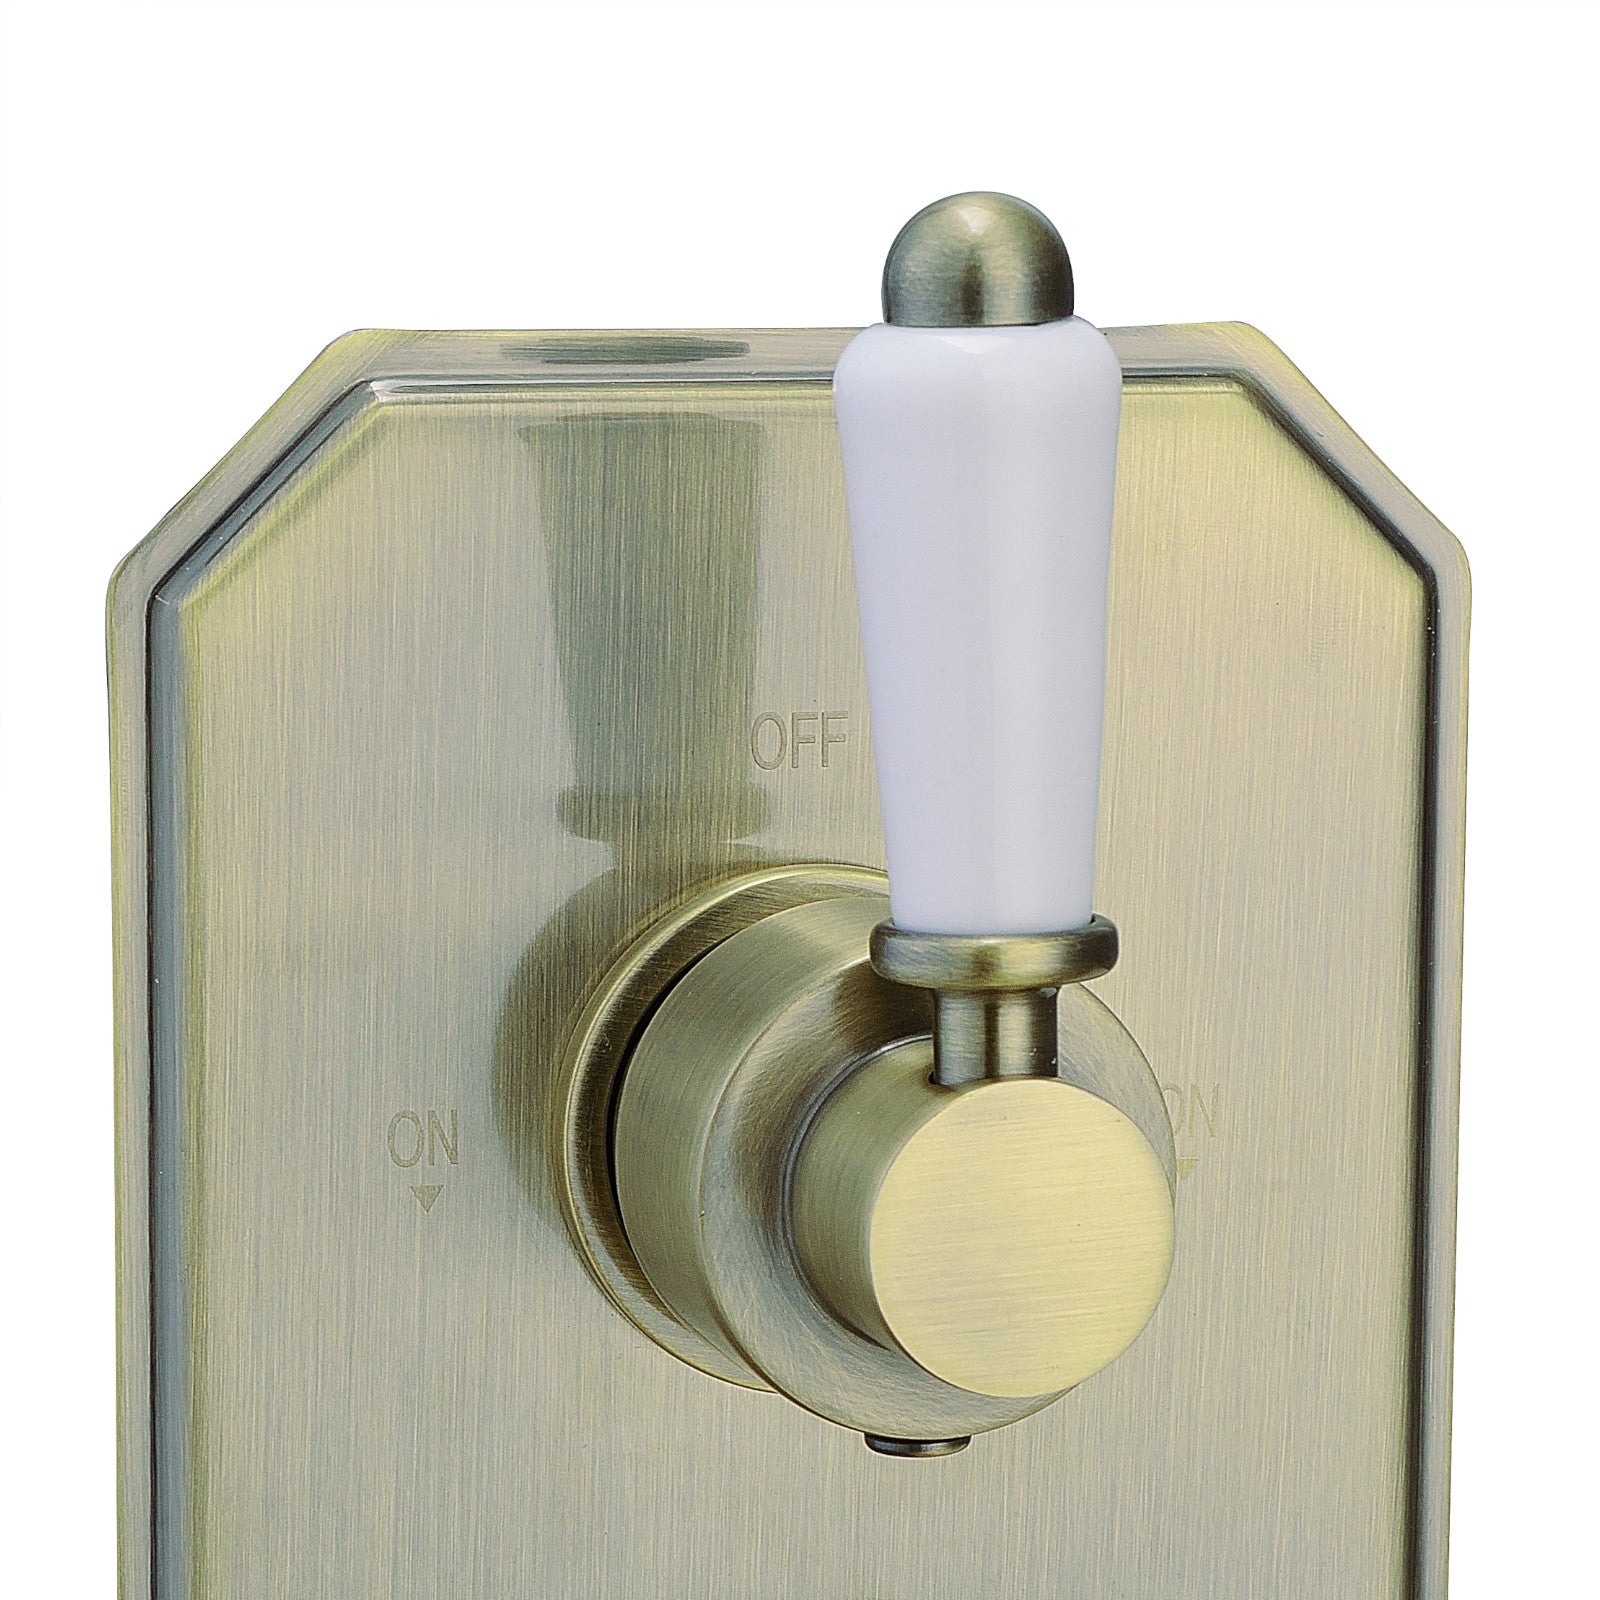 Regent traditional crosshead and lever concealed thermostatic twin shower valve with 2 outlets - antique bronze - Showers